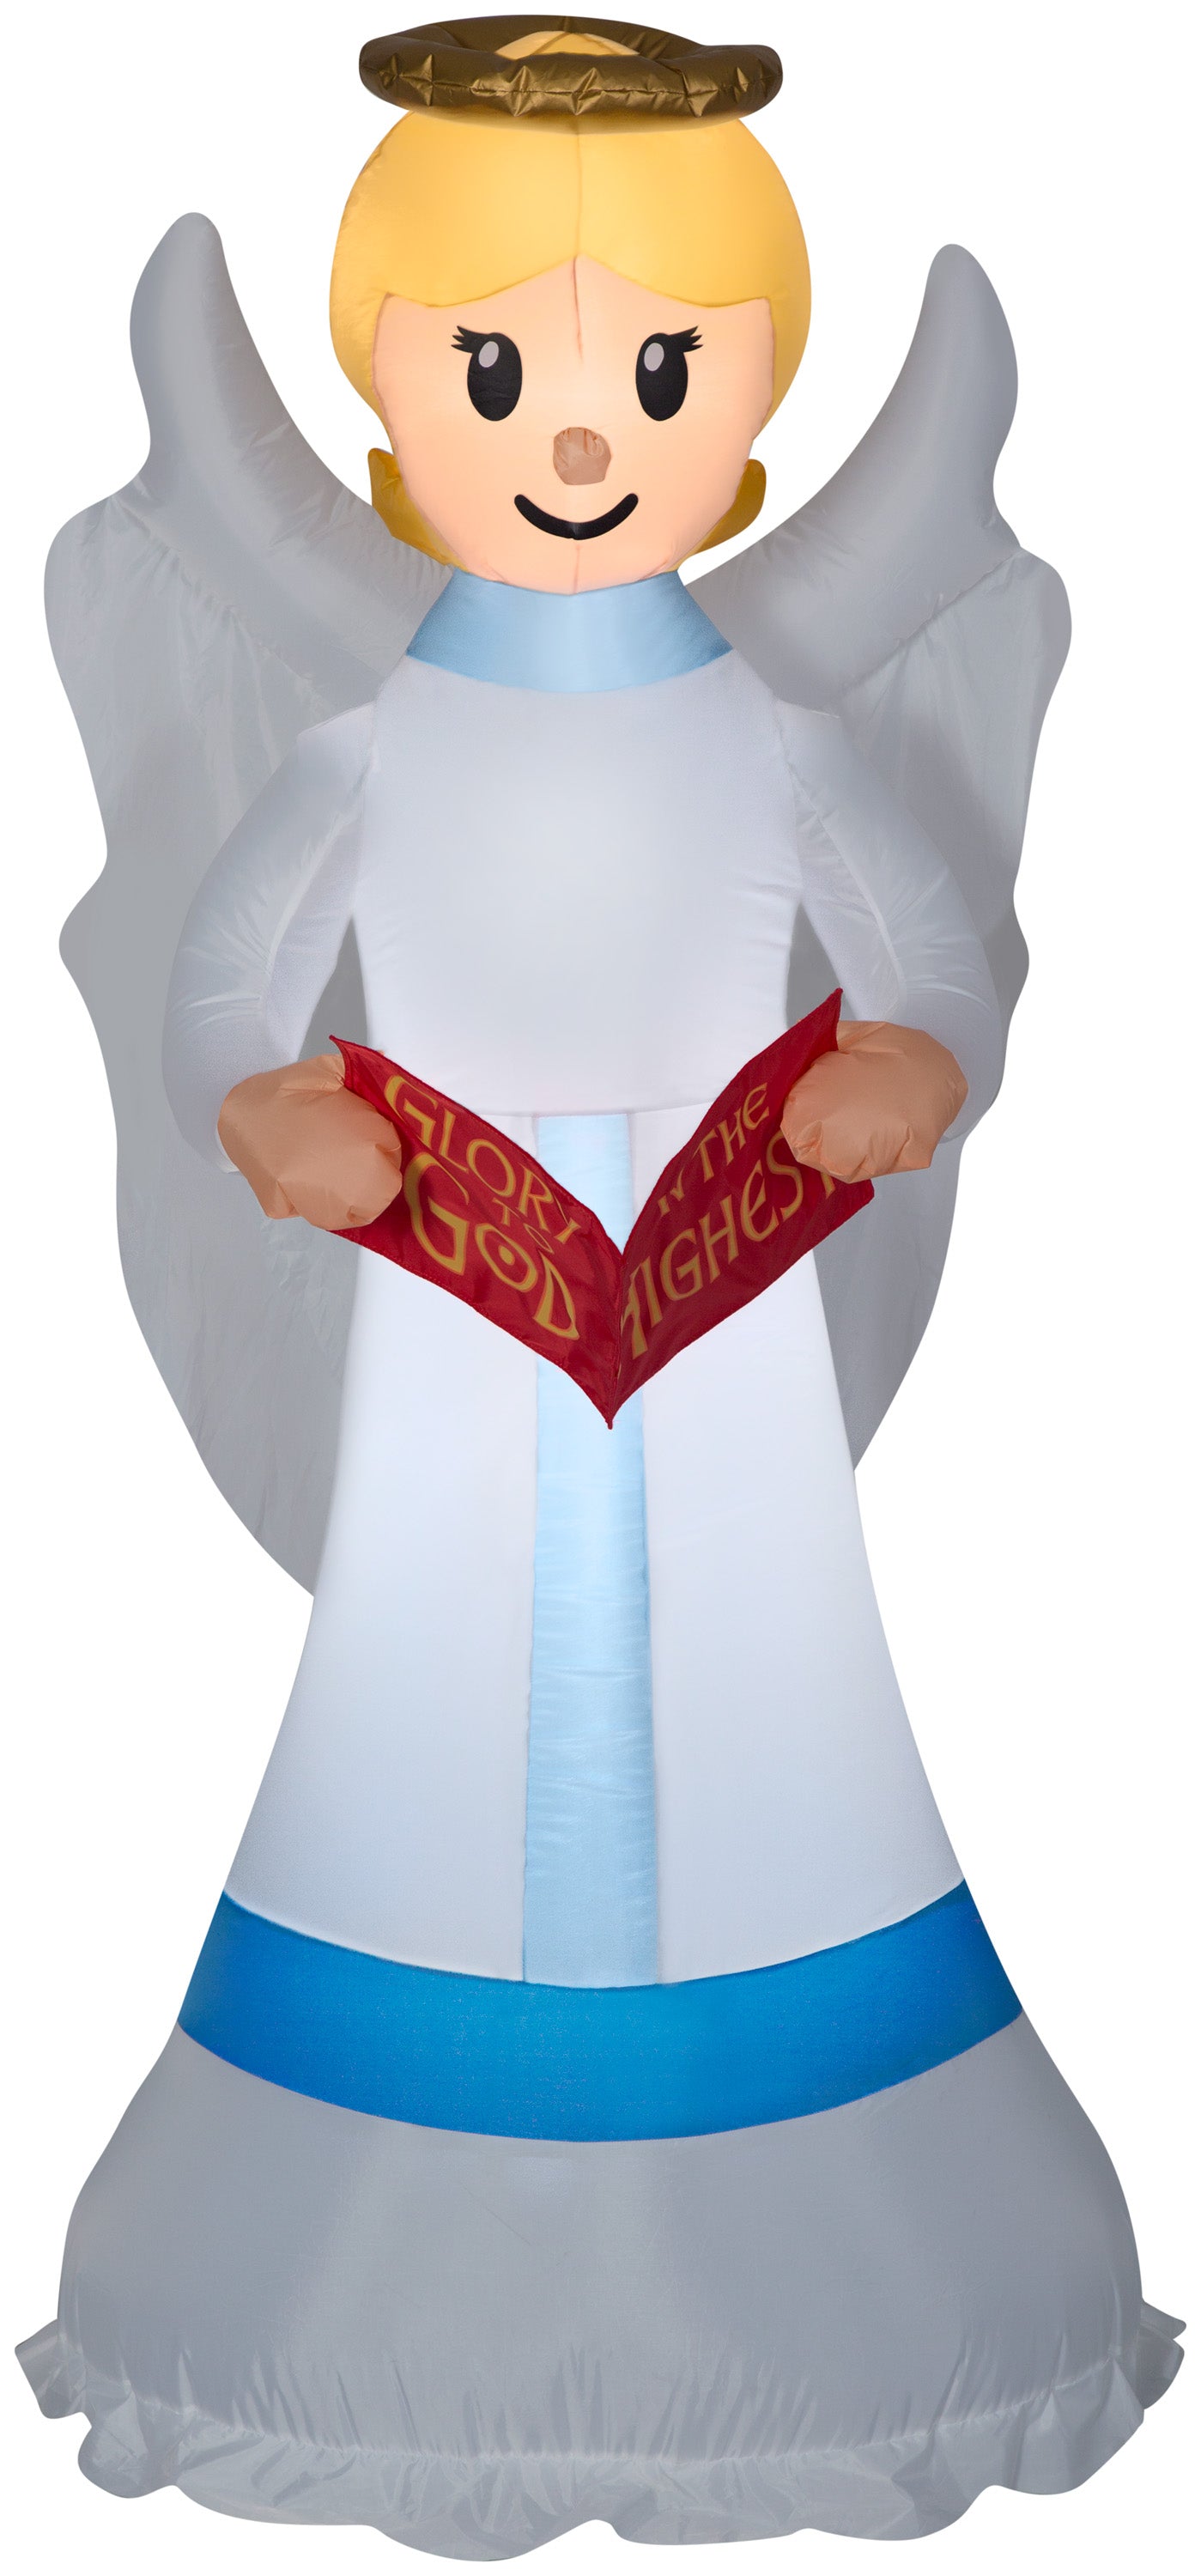 6' Airblown Angel Christmas Inflatable